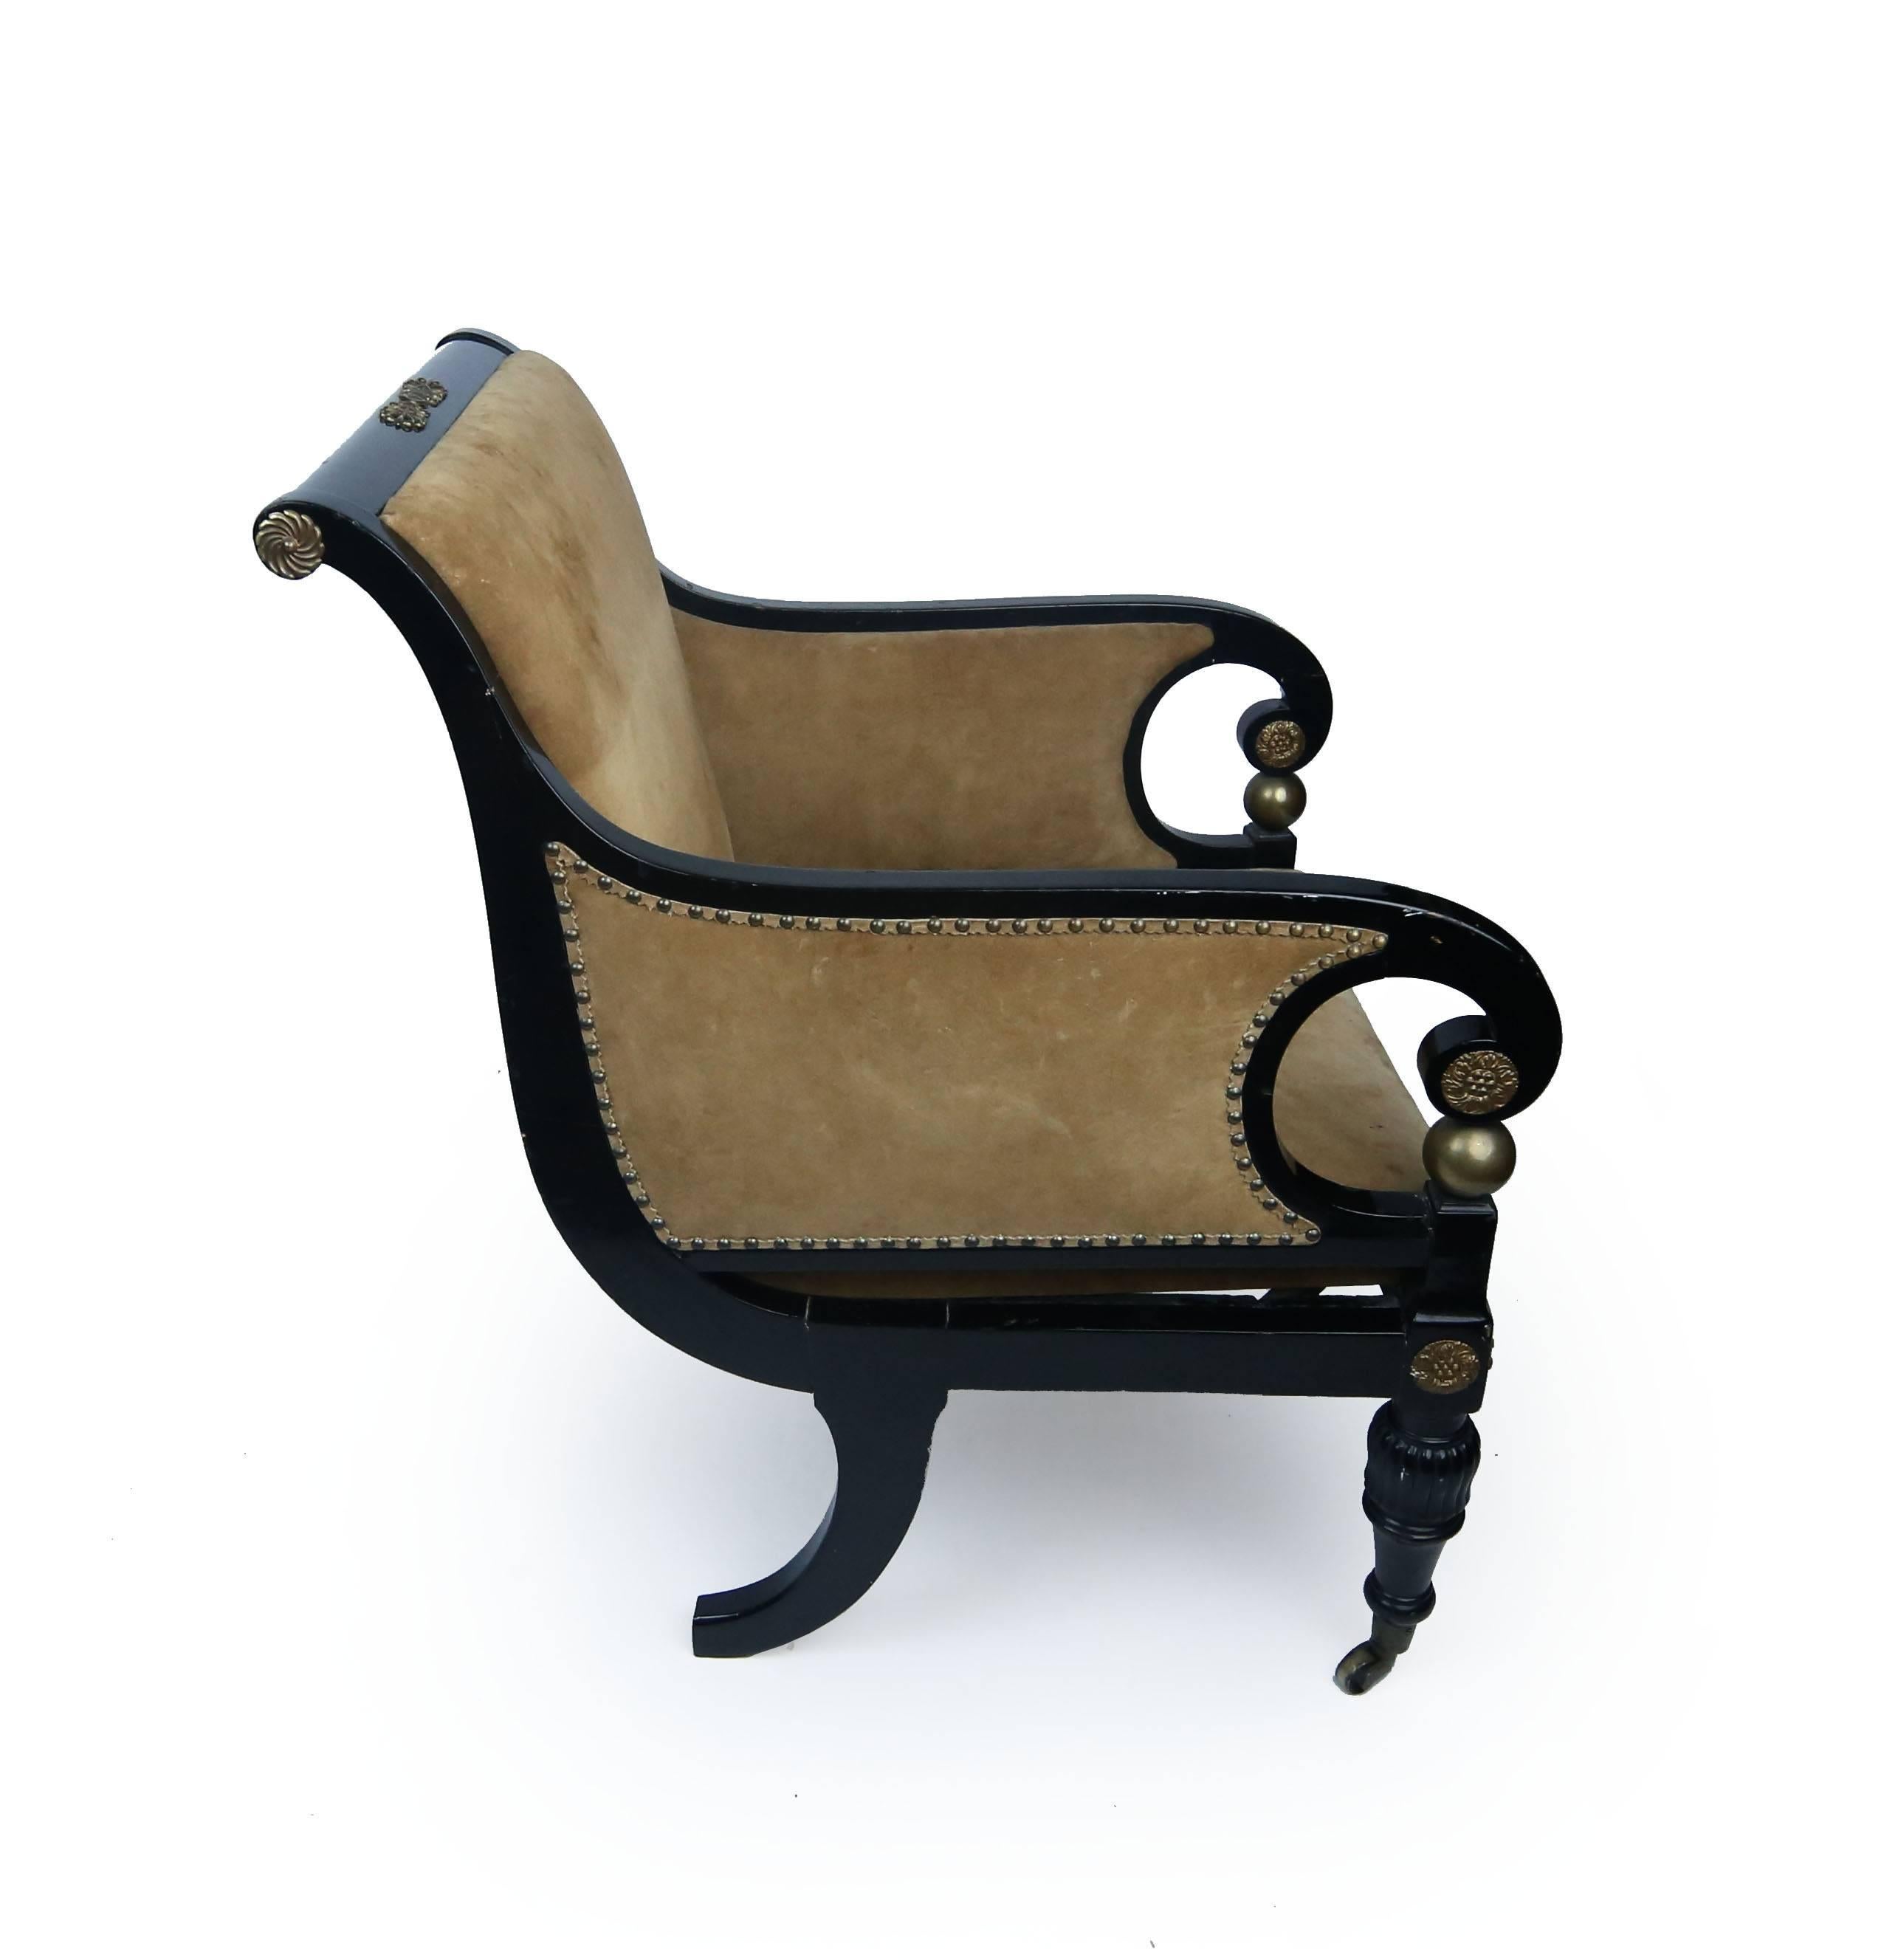 A Fine large classical club chair, black lacquered mahogany with sleigh back, spiral arms, brass decals, turned reeded front legs terminating in original castors, dramatic rear saber legs, upholstered in suede with brass tack nails. Made by Gillows